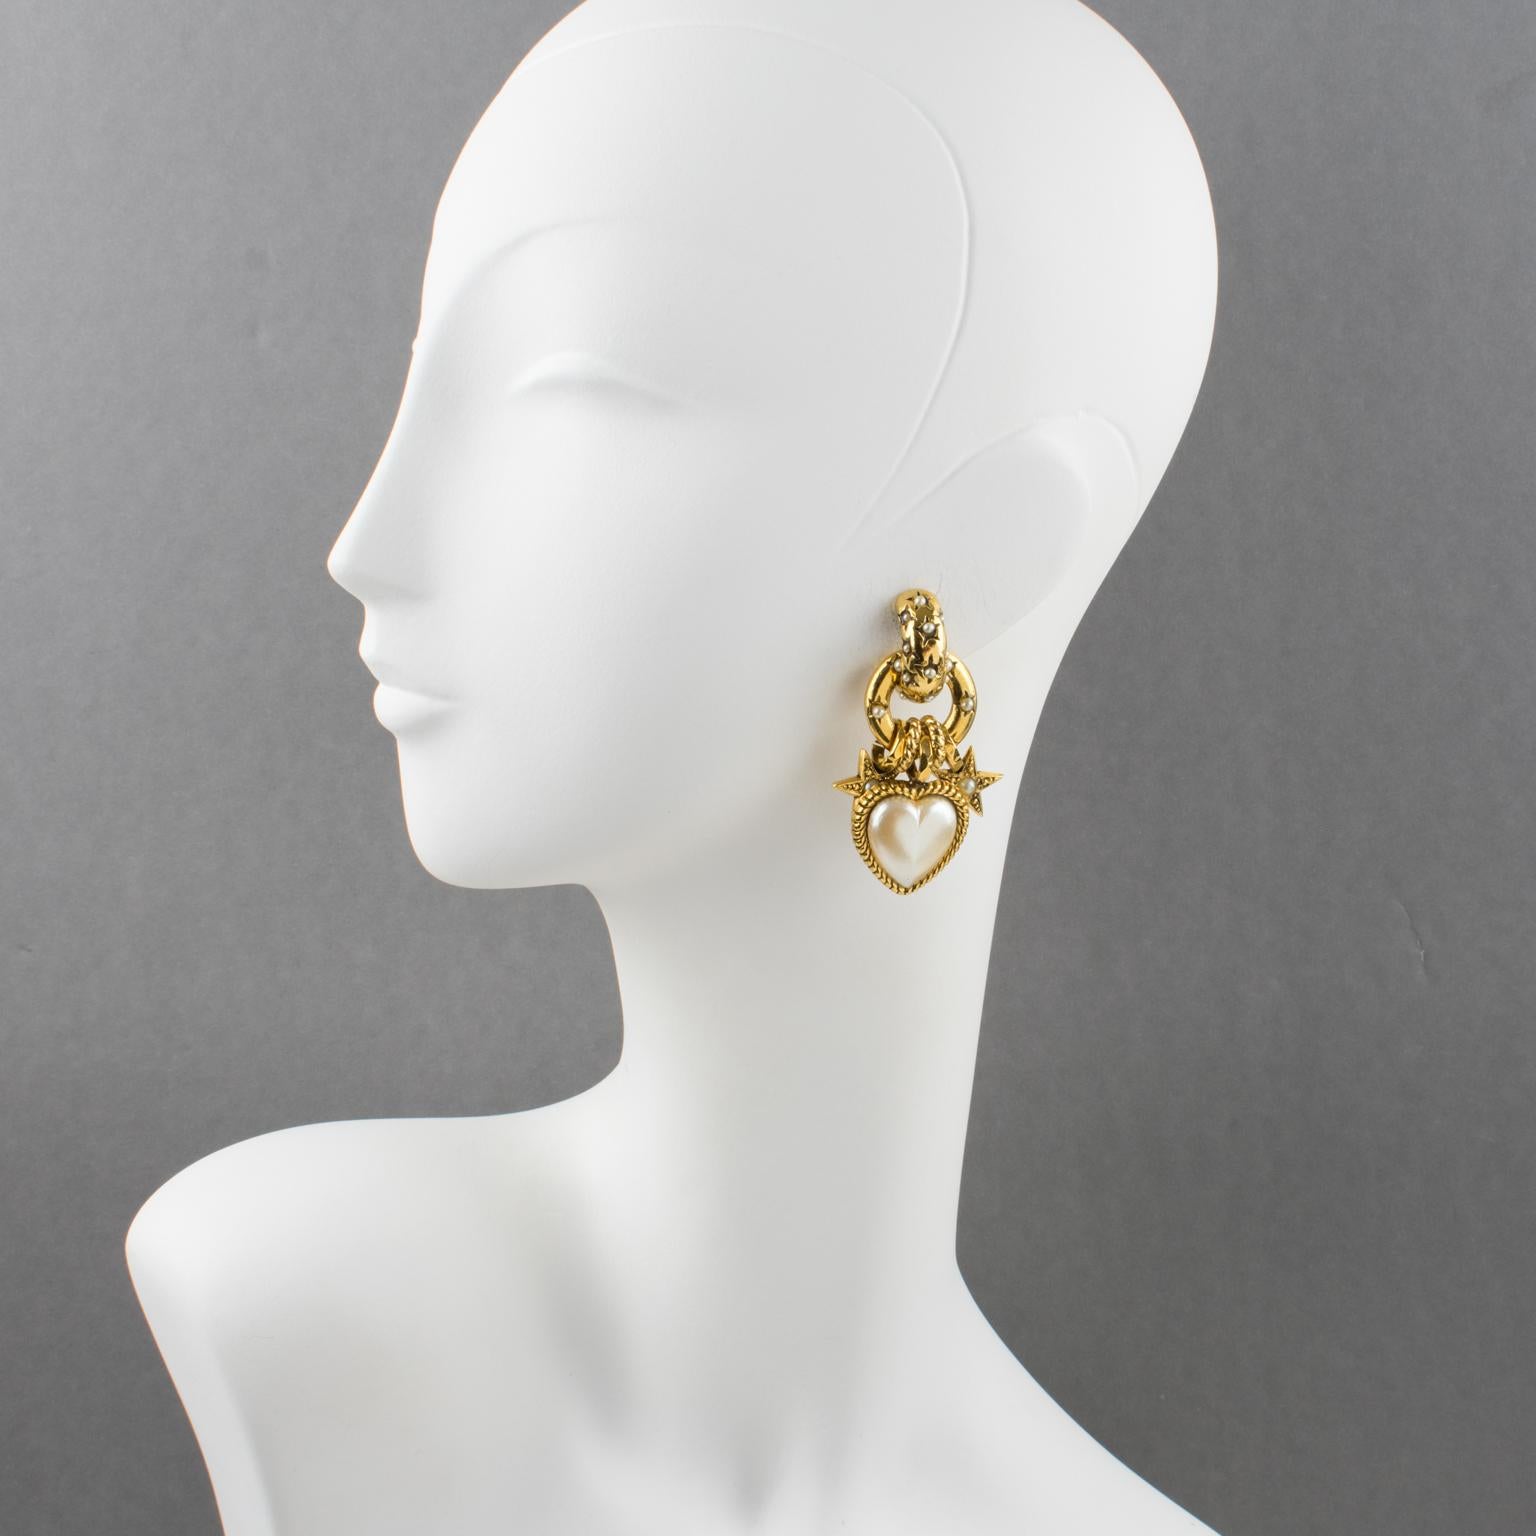 Lovely Zoe Coste romantic dangling clip-on earrings. Dramatic flair featuring heart and star design with gilt metal all textured ornate with dangling charms (heart, star, ring) and topped with pearl-imitation tiny glass cabochons. Central huge heart